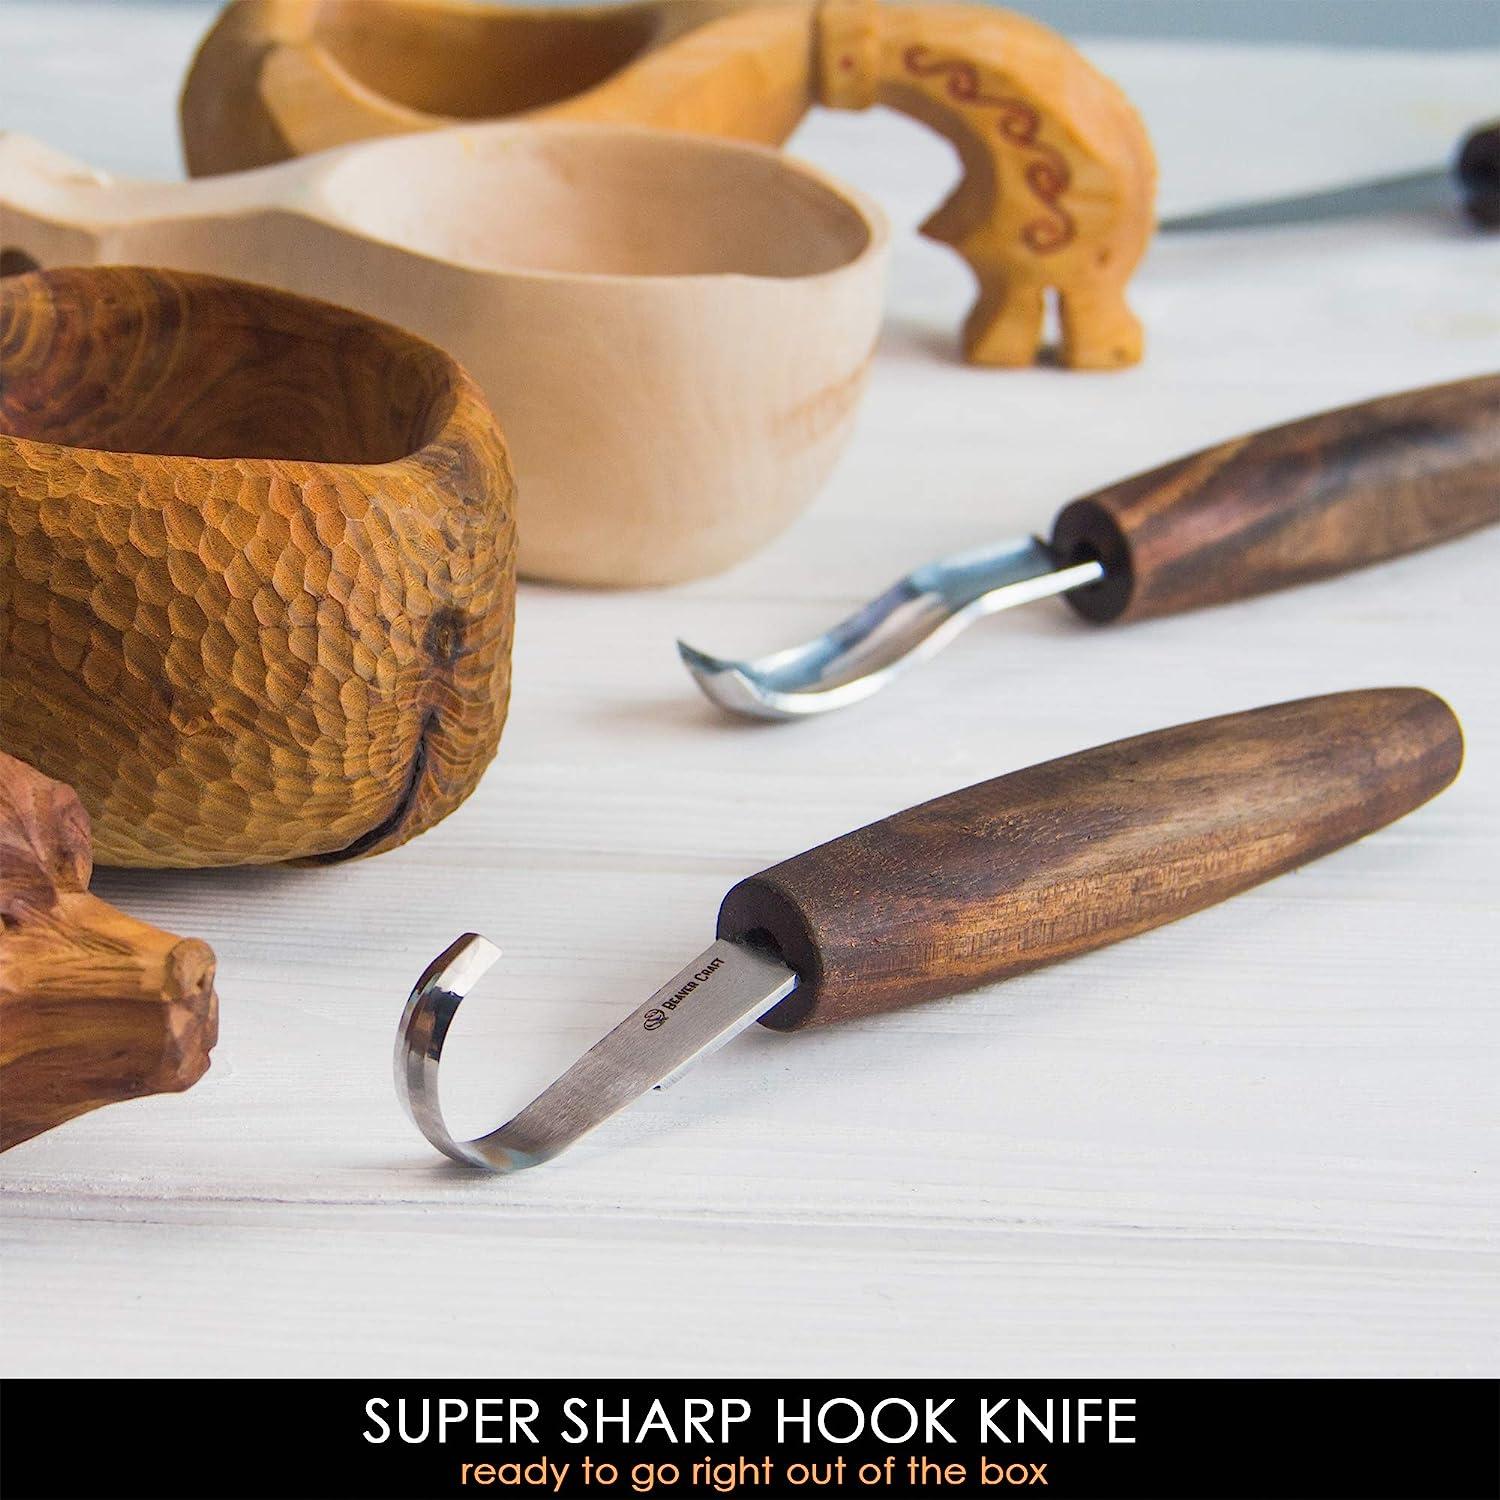 Deluxe Japanese Spoon Carving Kit